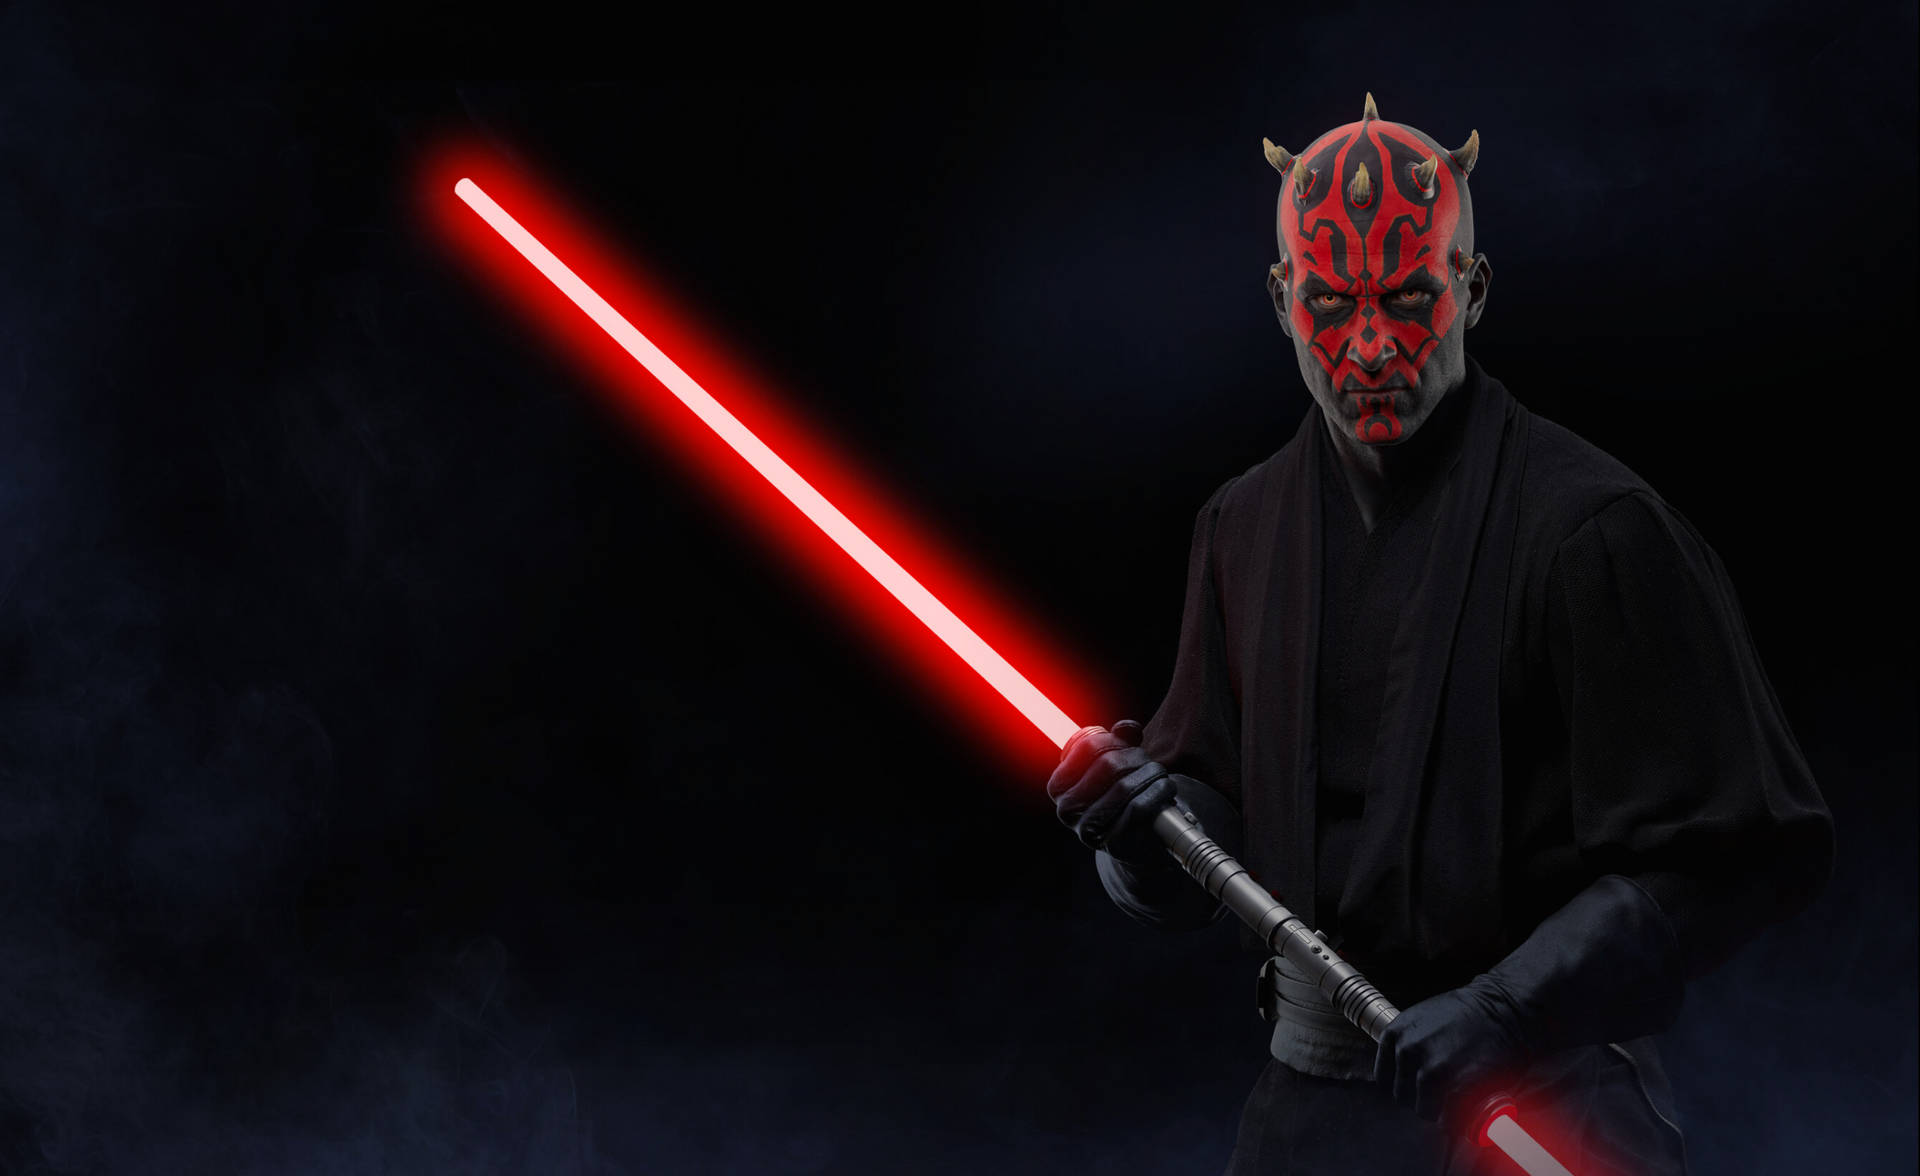 Darth Maul, The Deadly Sith Lord From Star Wars: The Phantom Menace Background